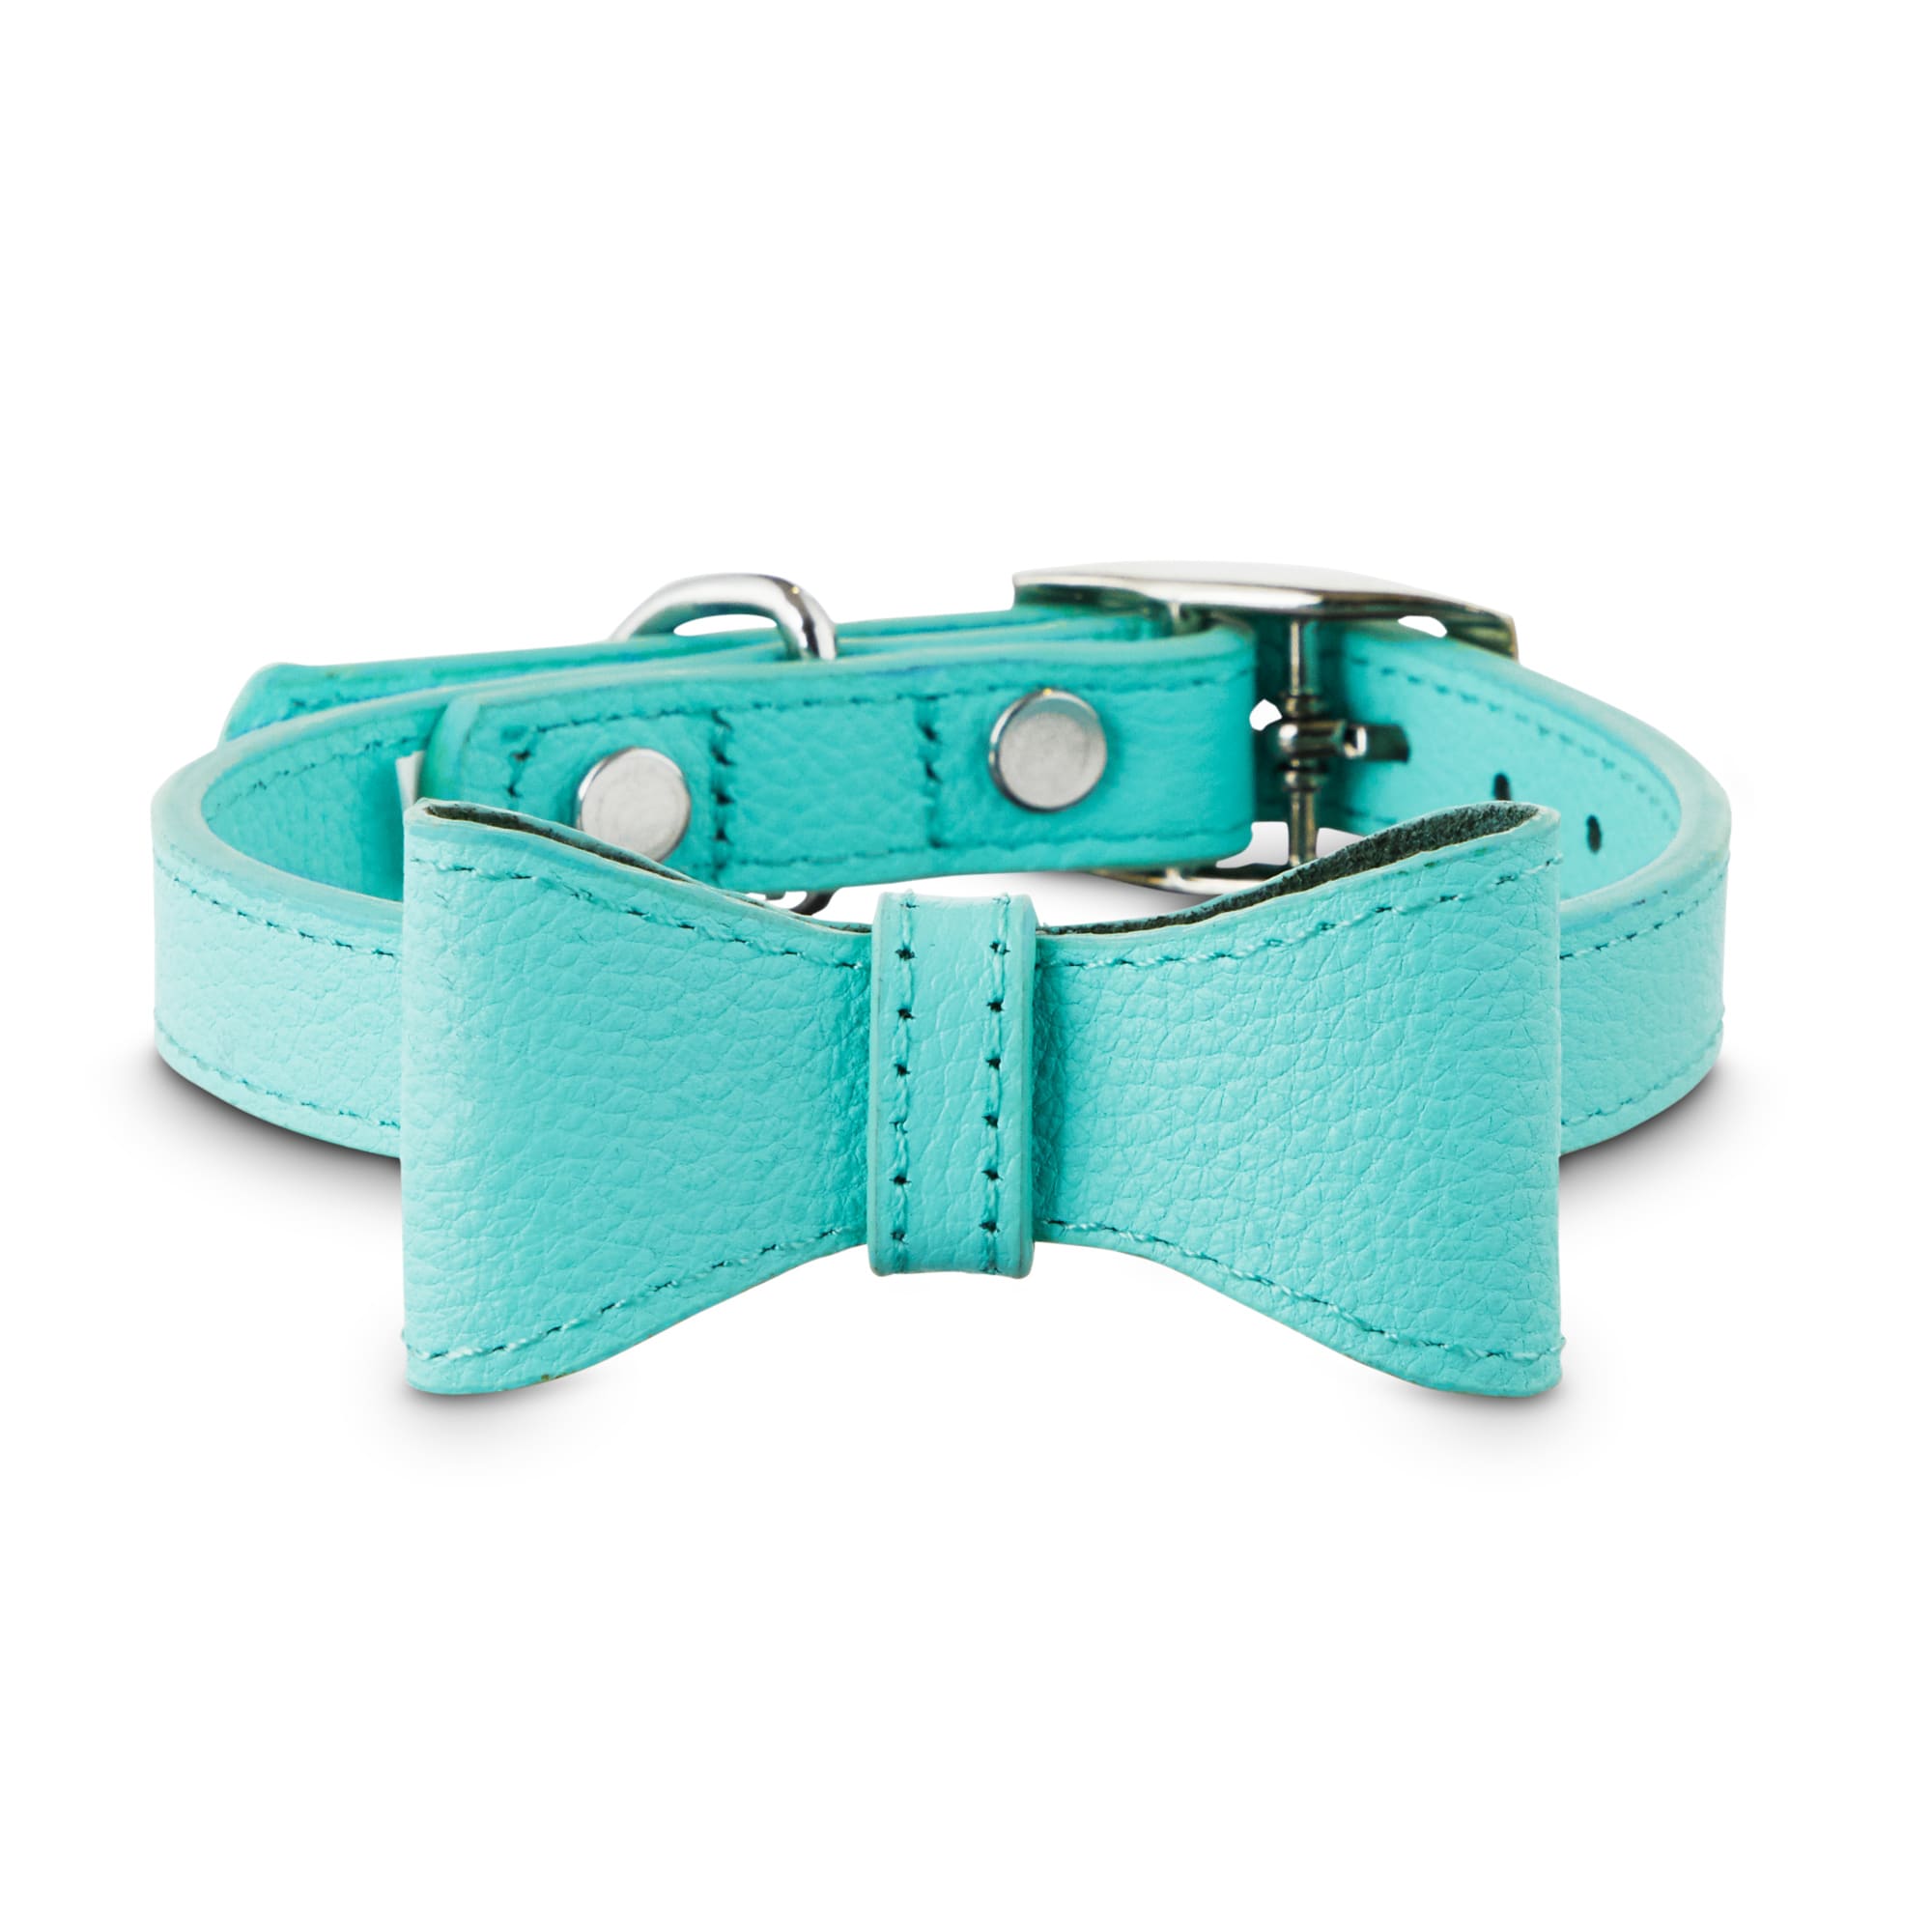 BOND & CO. Teal Leather Bow Tie Dog Collar, X-Small/Small | Petco